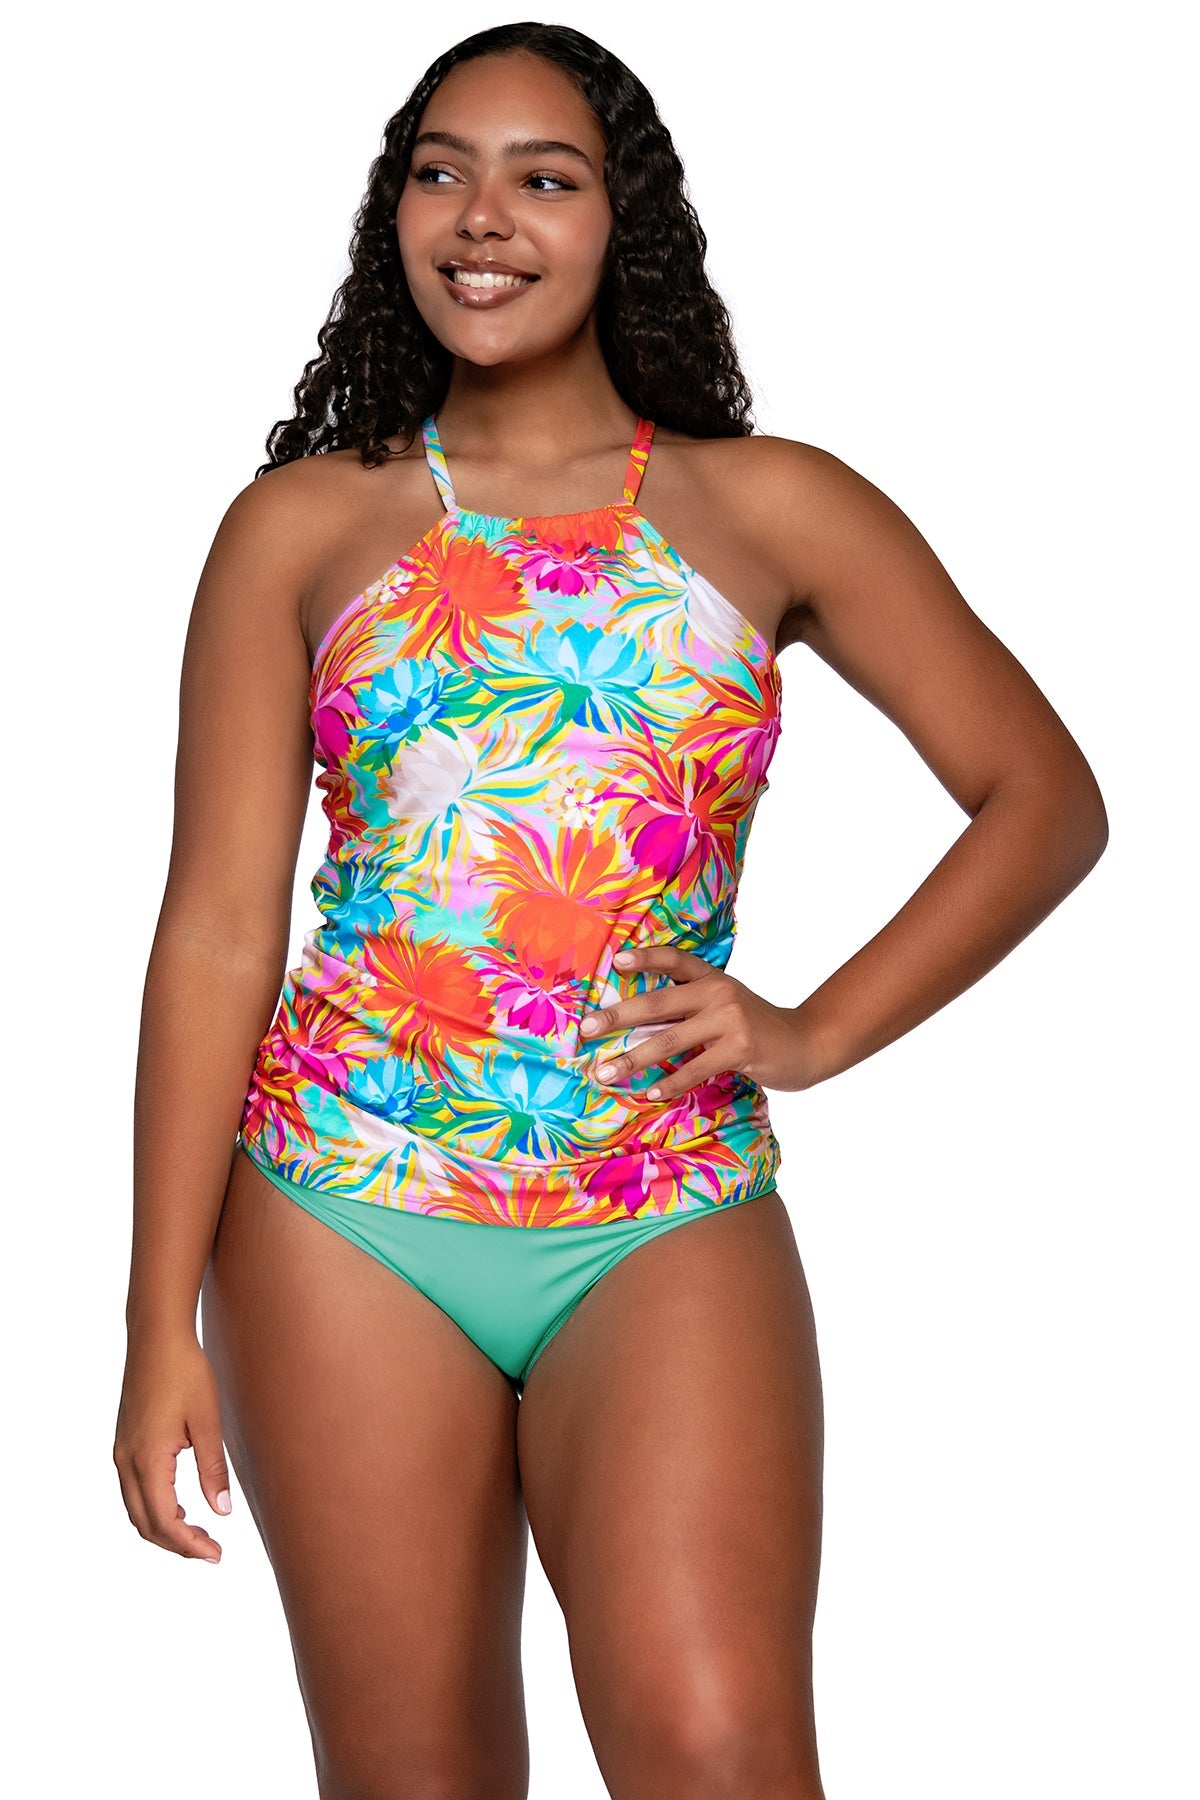 Sunsets Swimwear  Sunsets Tankinis & Halter Top Bathing Suits